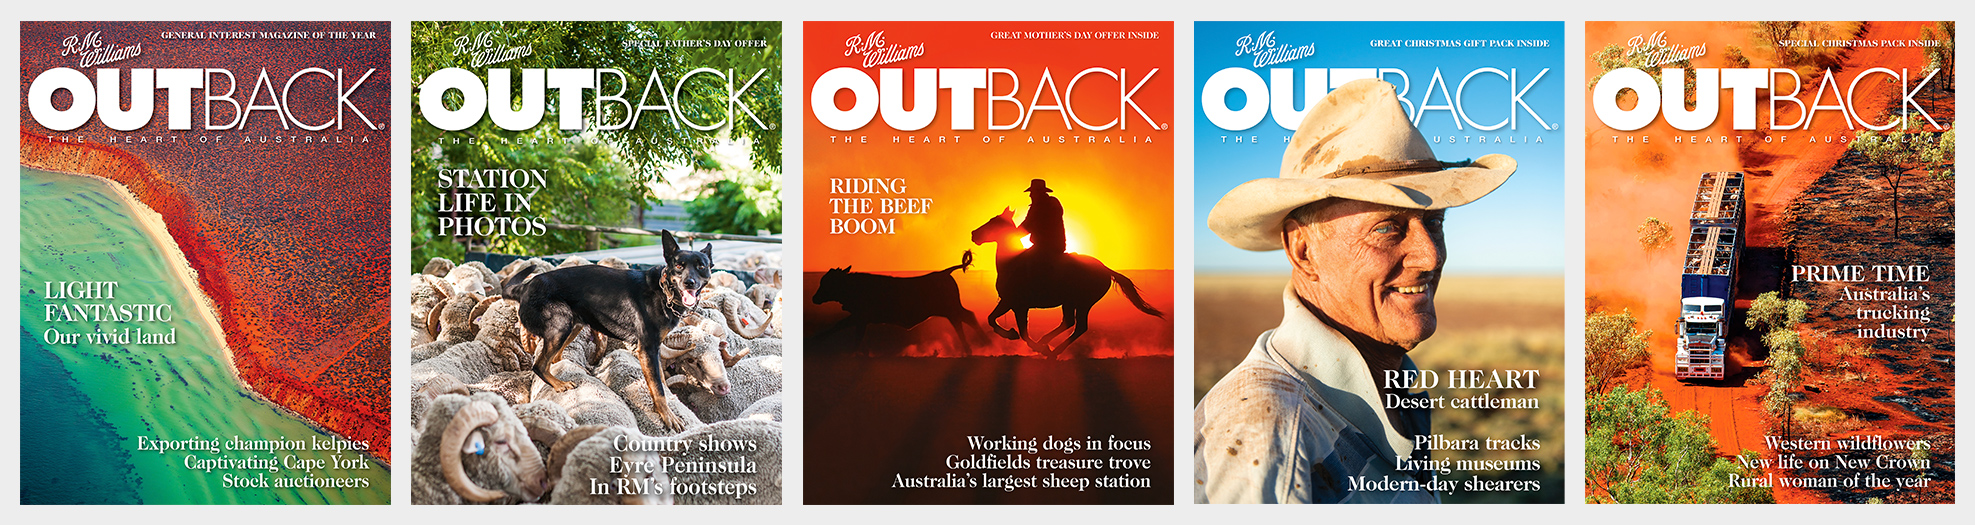 Outback Magazine Covers